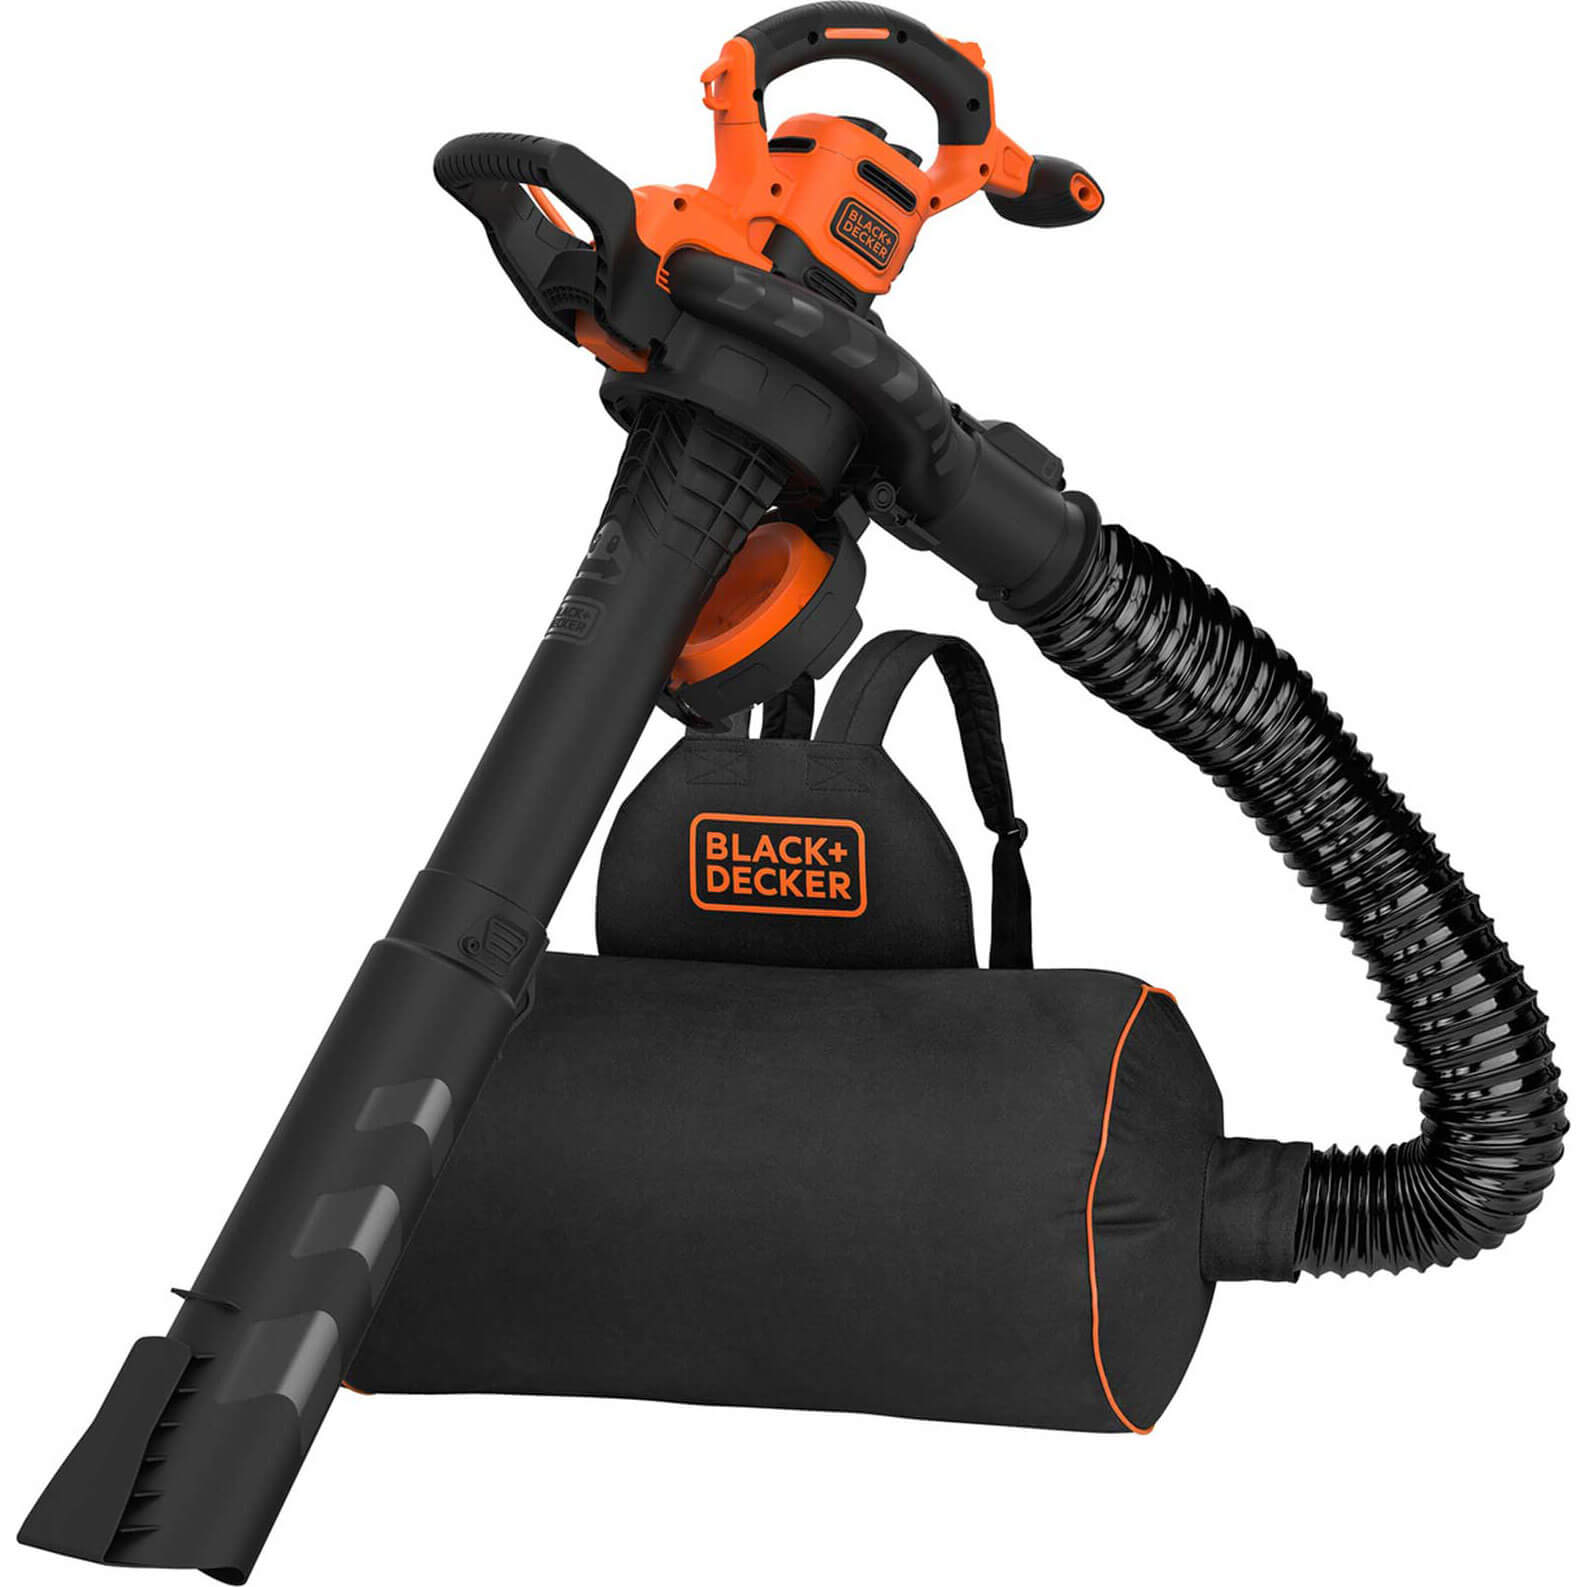 Image of Black & Decker leaf blower with safety guard